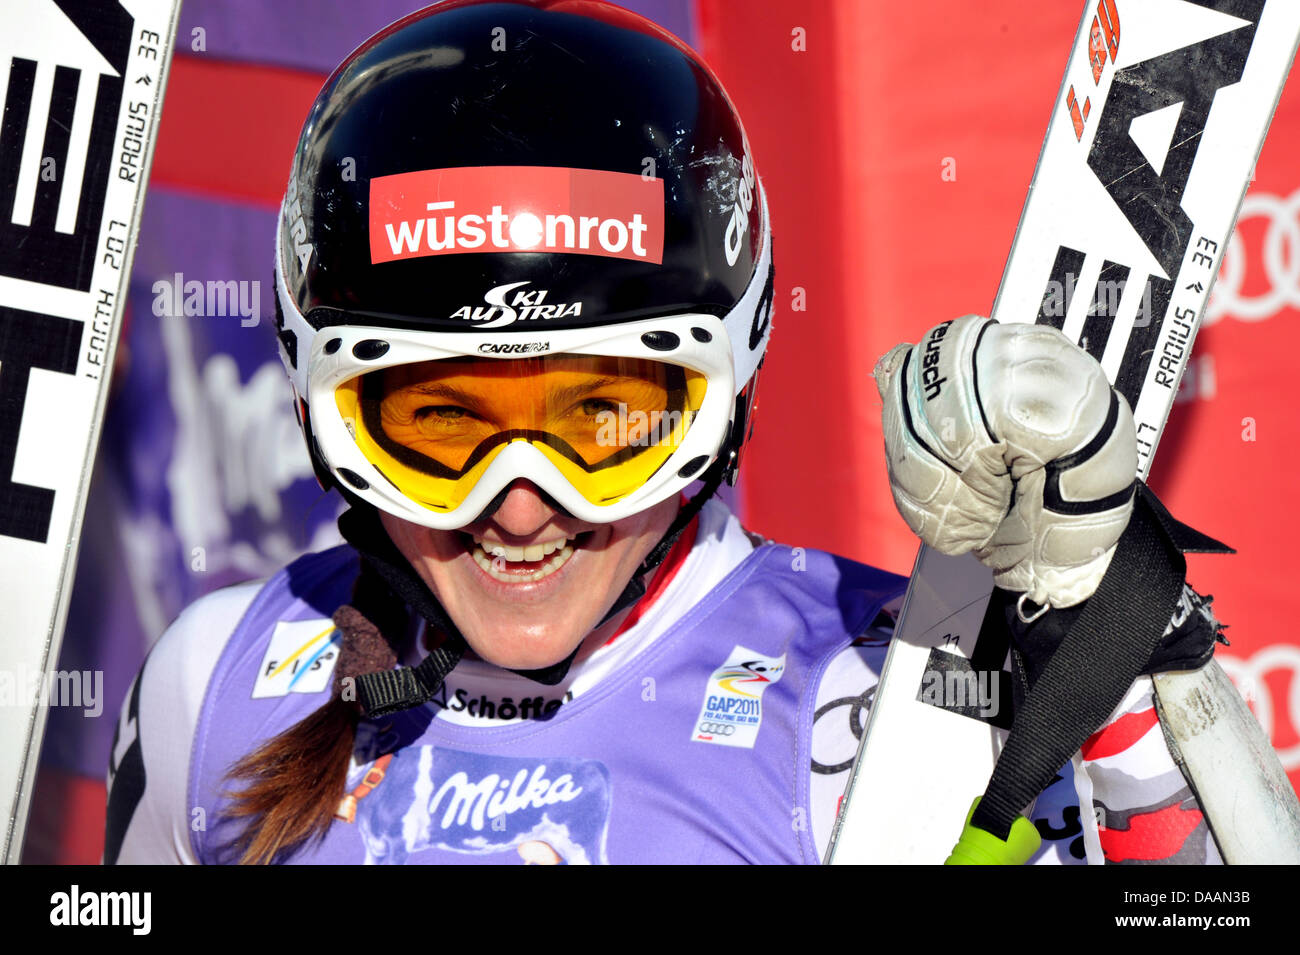 Julia Mancuso of the USA celebrates in the finish area of the Women's Super G race at the Alpine Skiing World Championships in Garmisch-Partenkirchen, Germany, 08 February 2011. Photo: Stephan Jansen Stock Photo